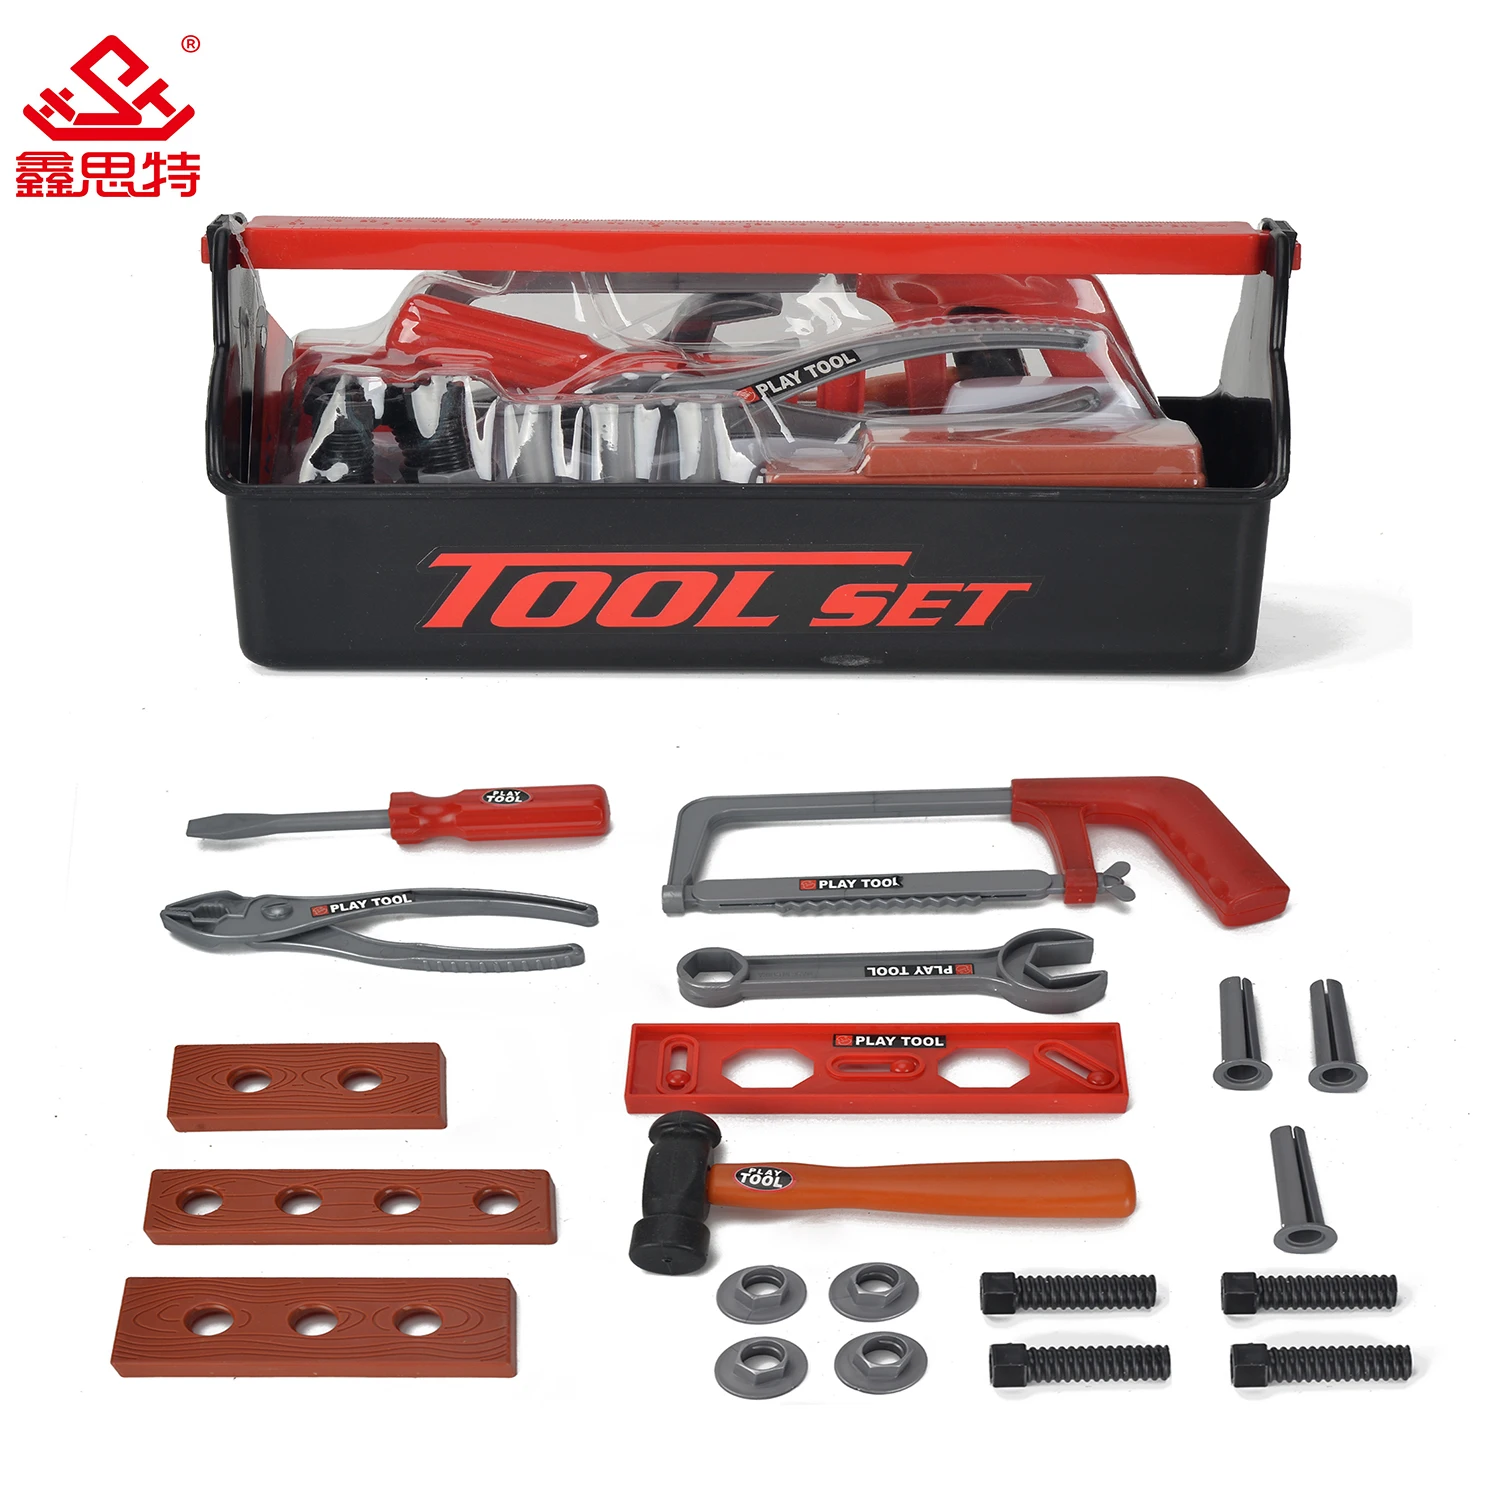 XST The New Listing Boy Toys Drill Electrician Toy Mechanic Tool Box Set (1600338709082)